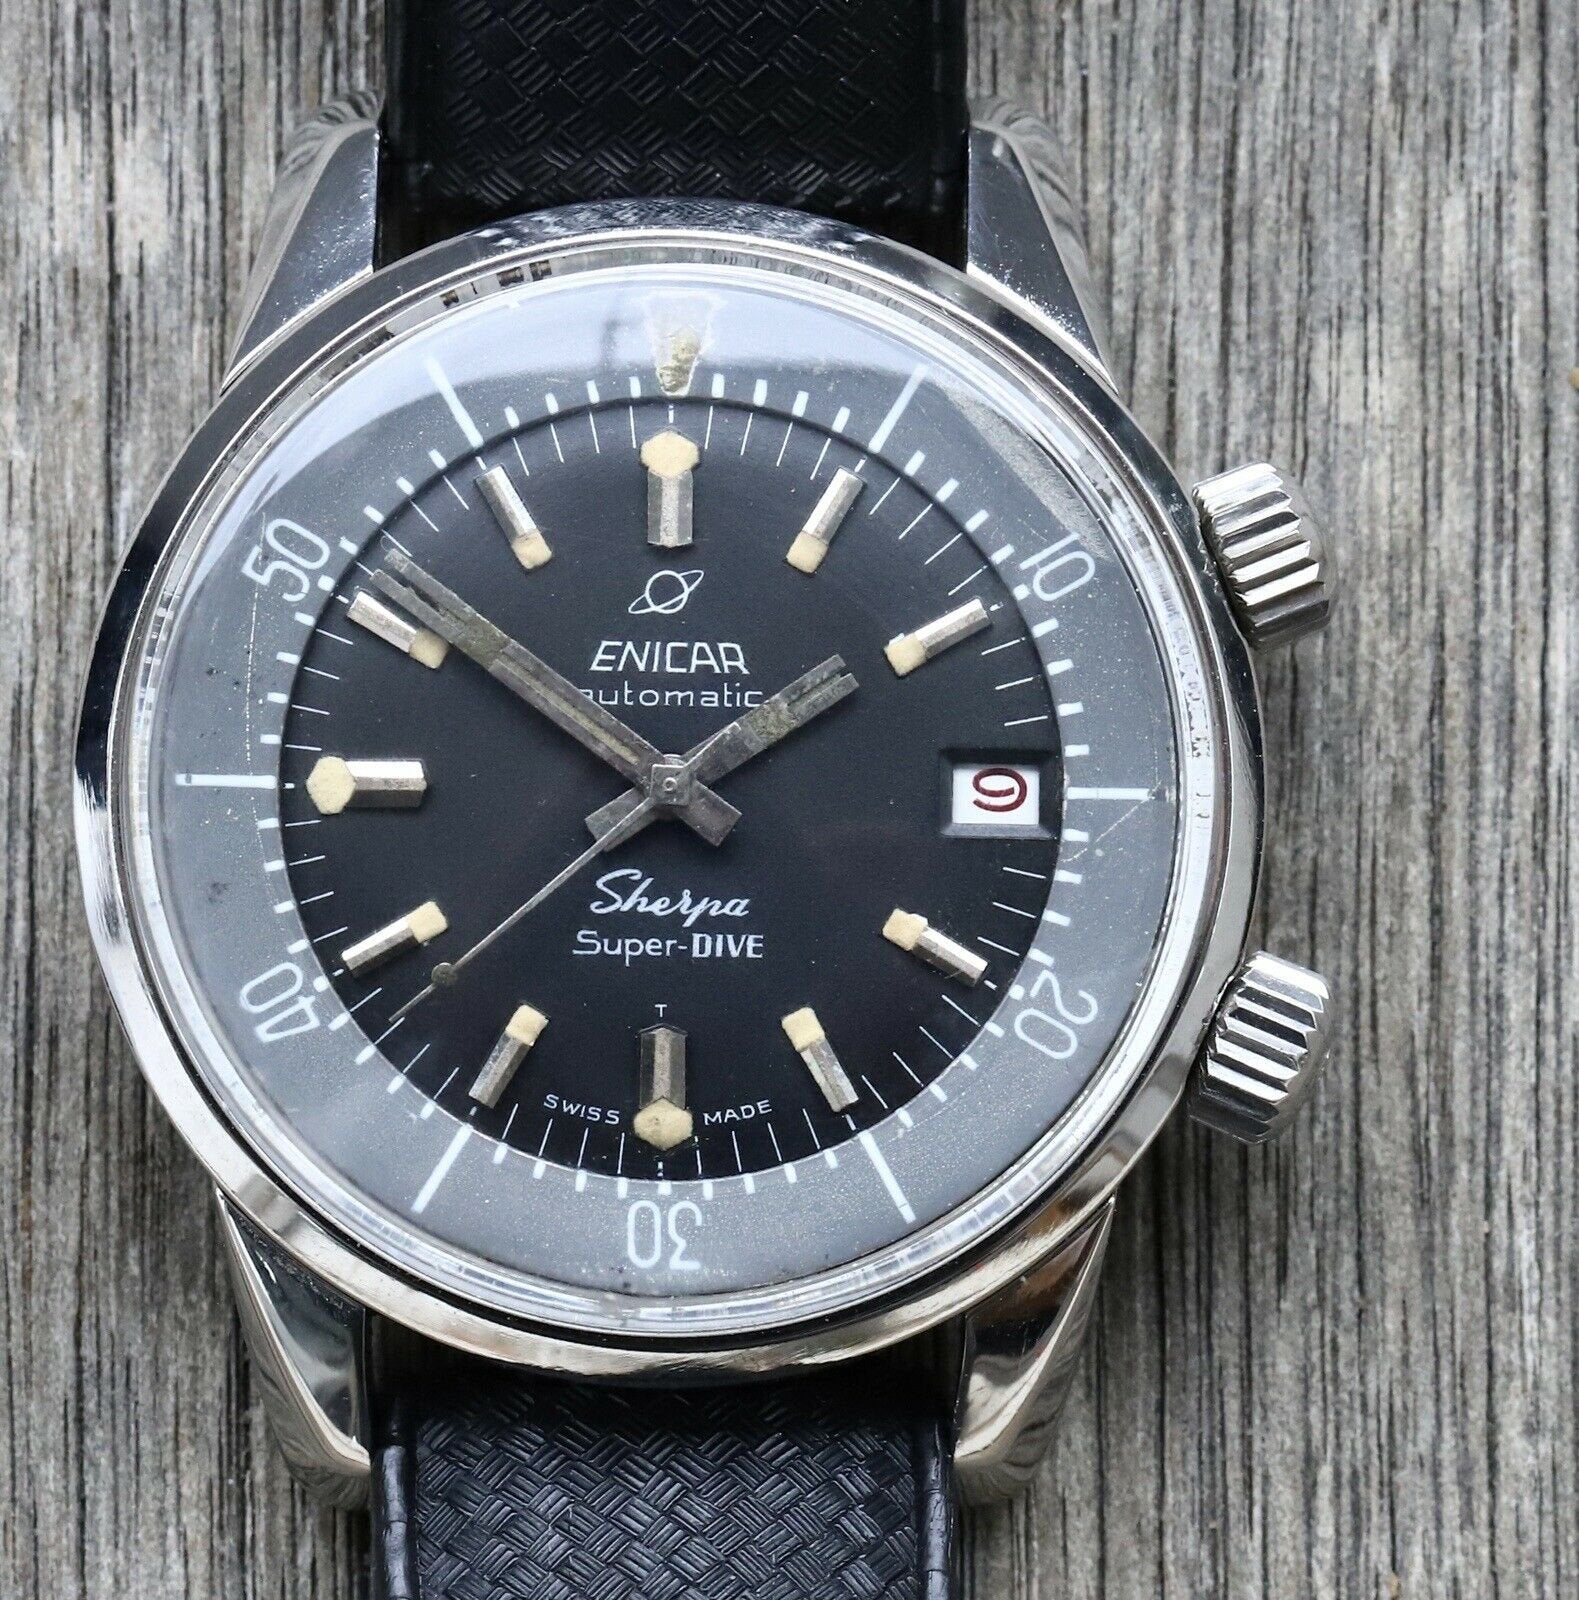 Enicar Sherpa 600 Super Dive 144-35-02 Military Issue